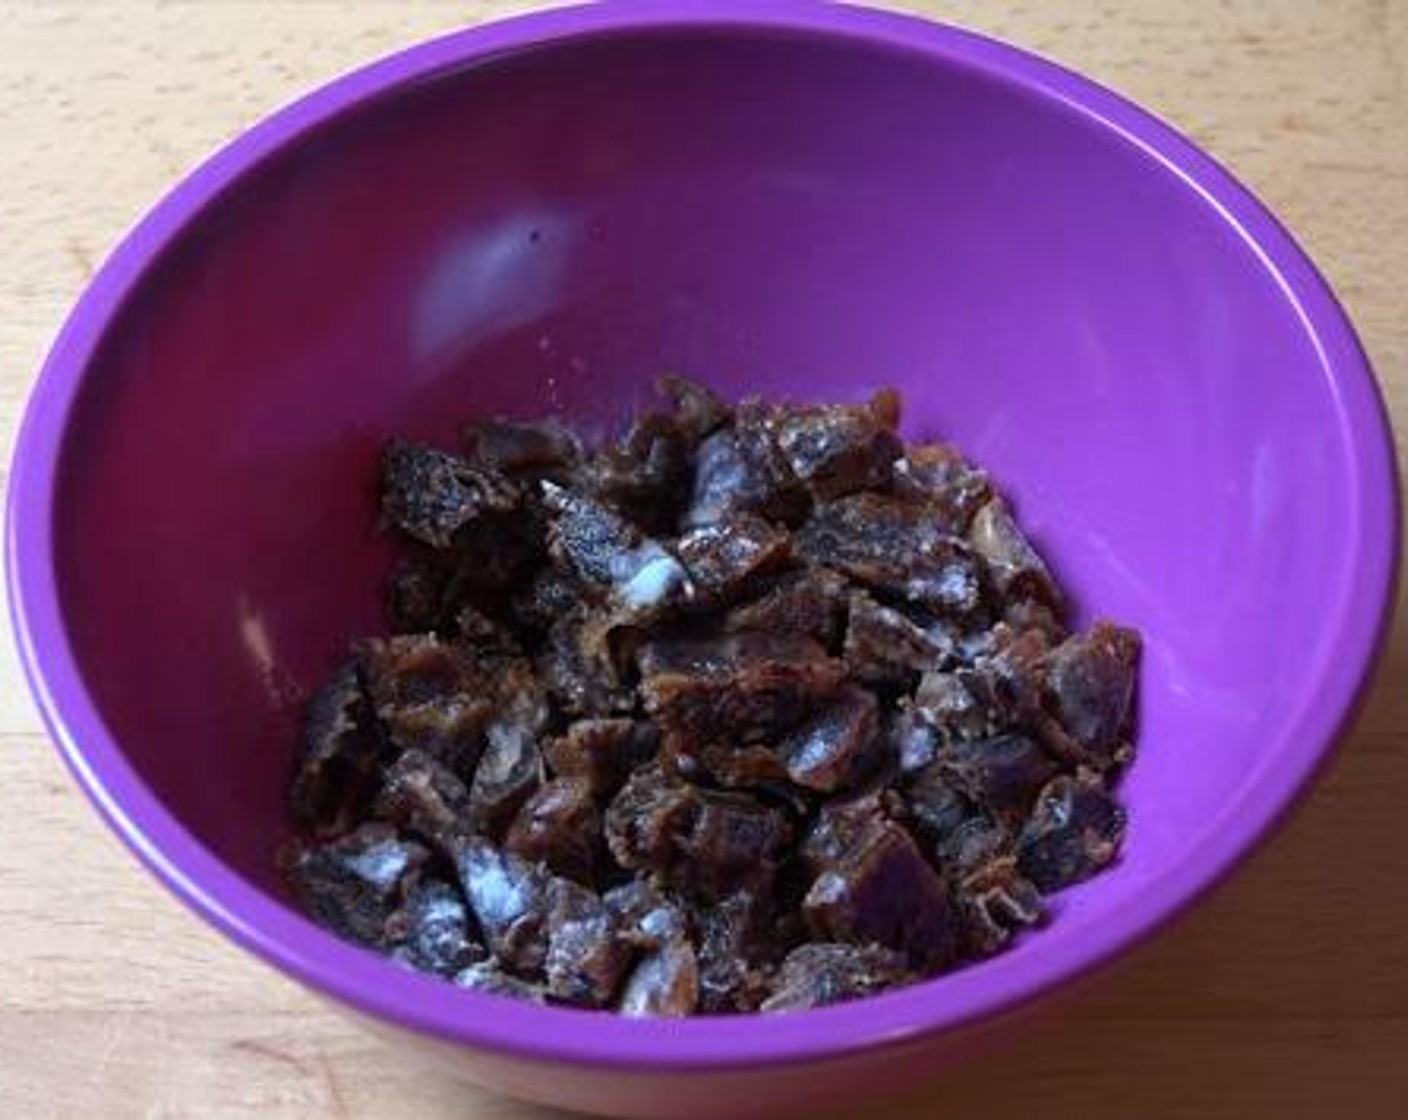 step 1 Into a bowl, add in and mix the chopped Dates (3/4 cup), Baking Soda (1/4 tsp), and Water (3 Tbsp).